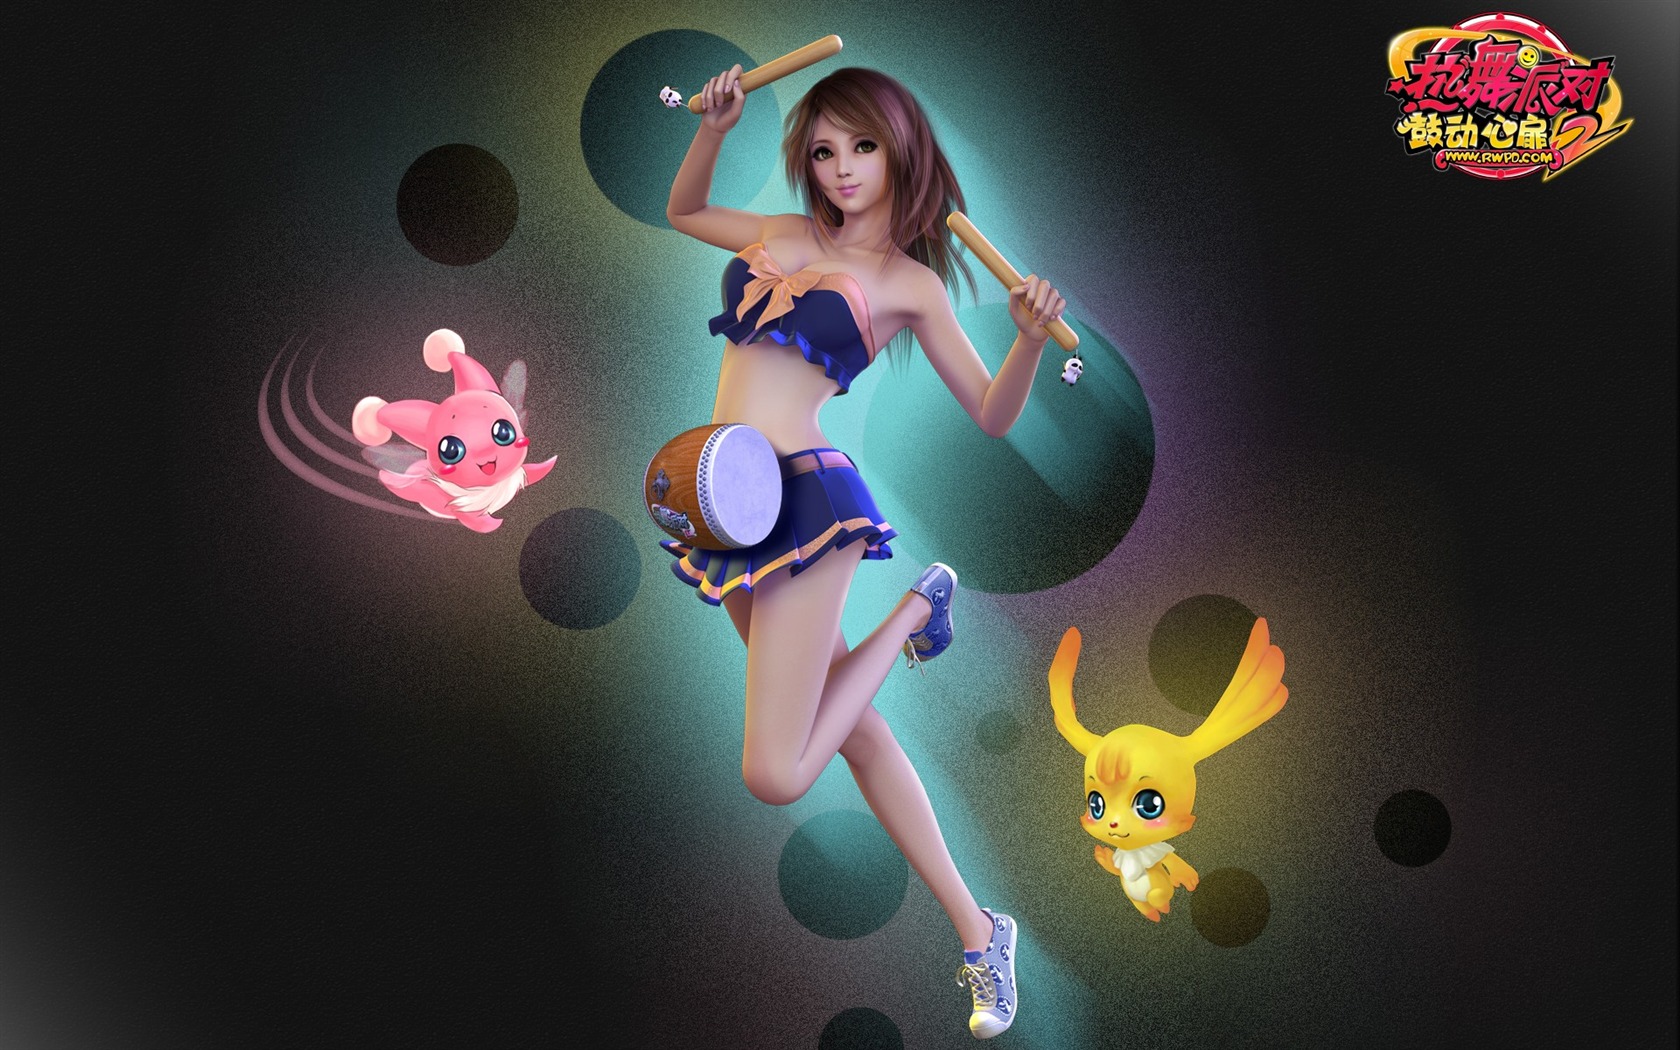 Online game Hot Dance Party II official wallpapers #16 - 1680x1050